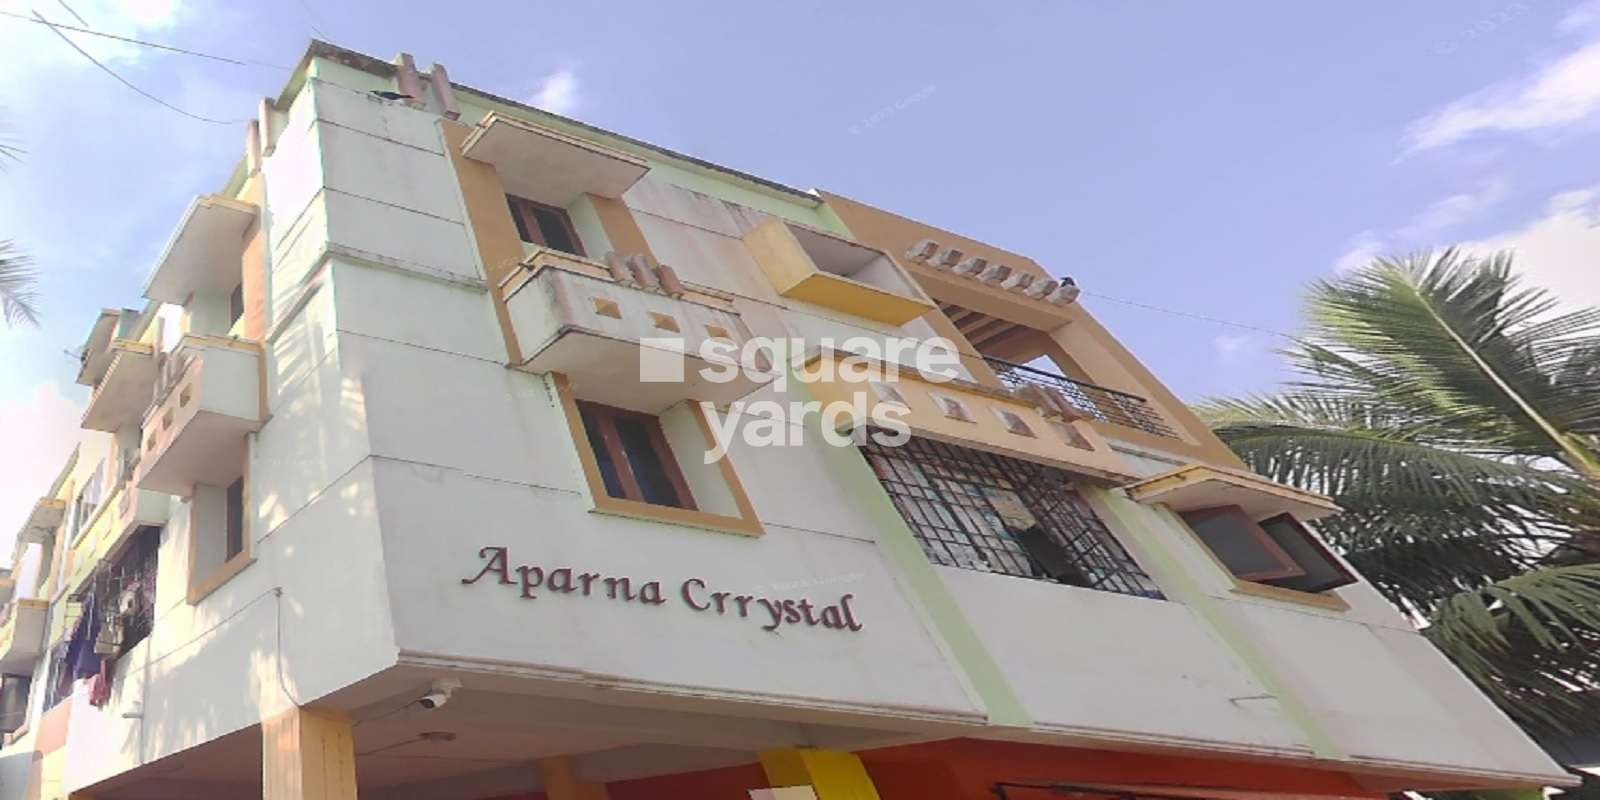 Aparna Crystal Apartment Cover Image